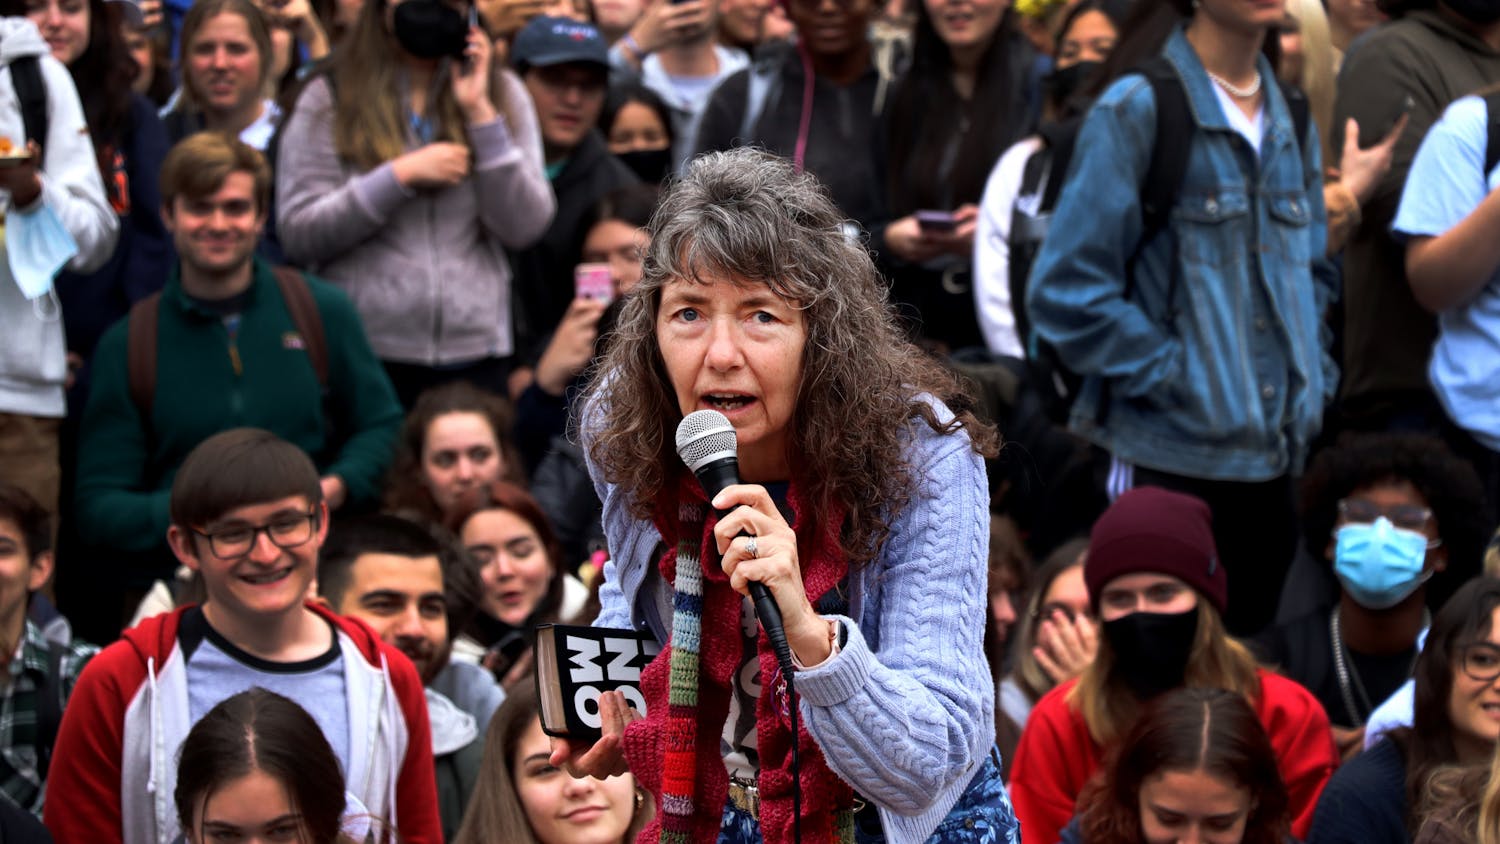 Evangelist Cindy Lasseter Smock, better known as "Sister Cindy" to her TikTok fans, speaks to a crowd of over 500 students at Plaza of the Americas on Monday, Feb. 7. 